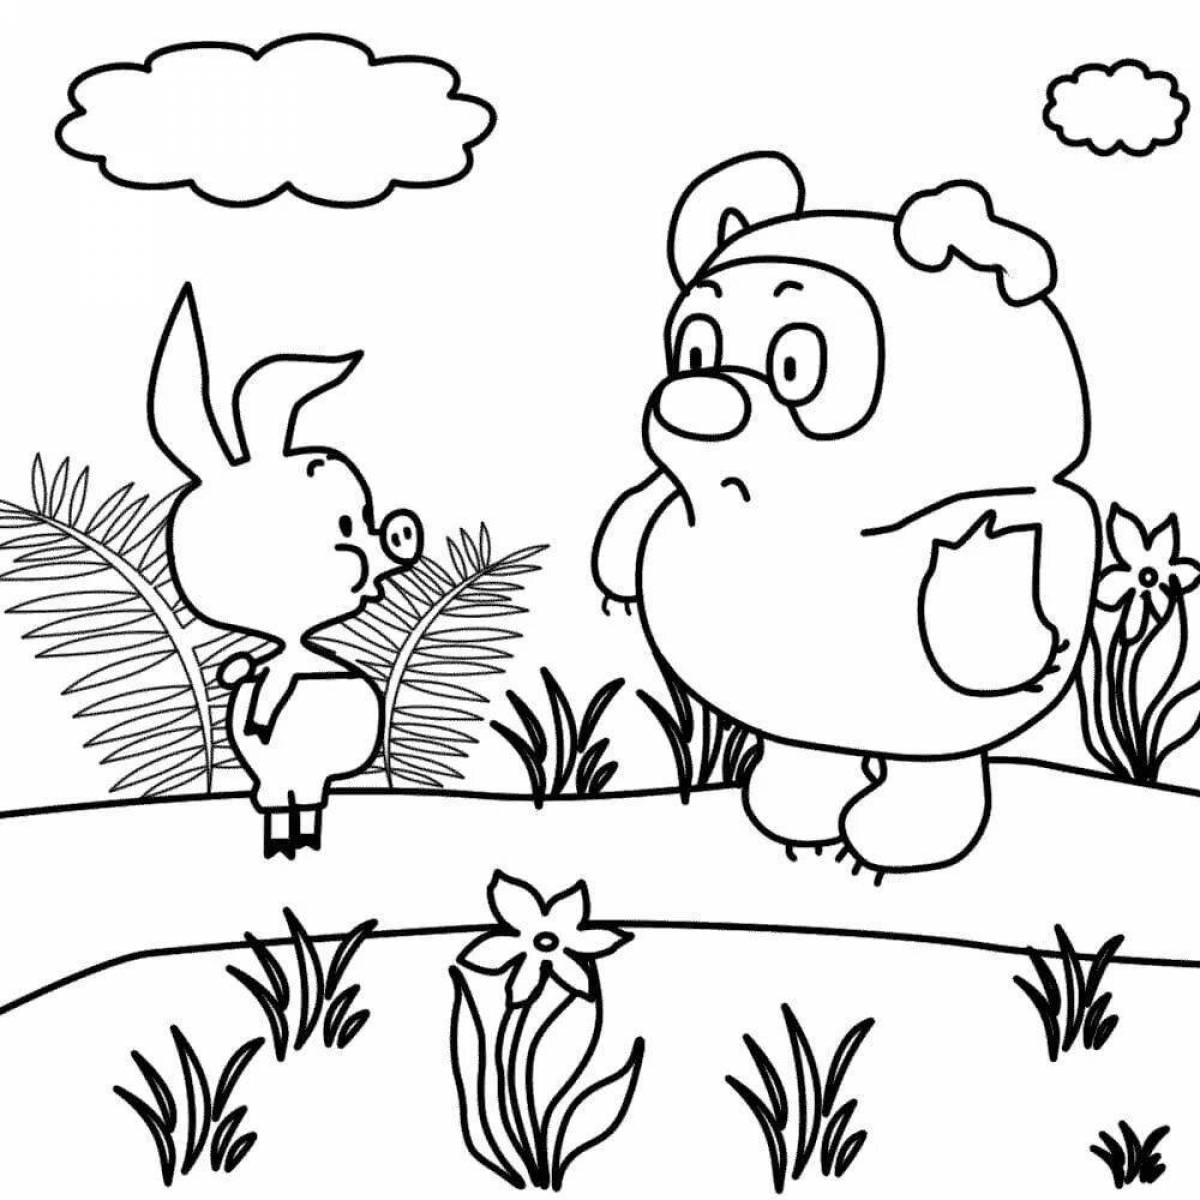 Color-brilliant coloring page for a child 3-4 years old